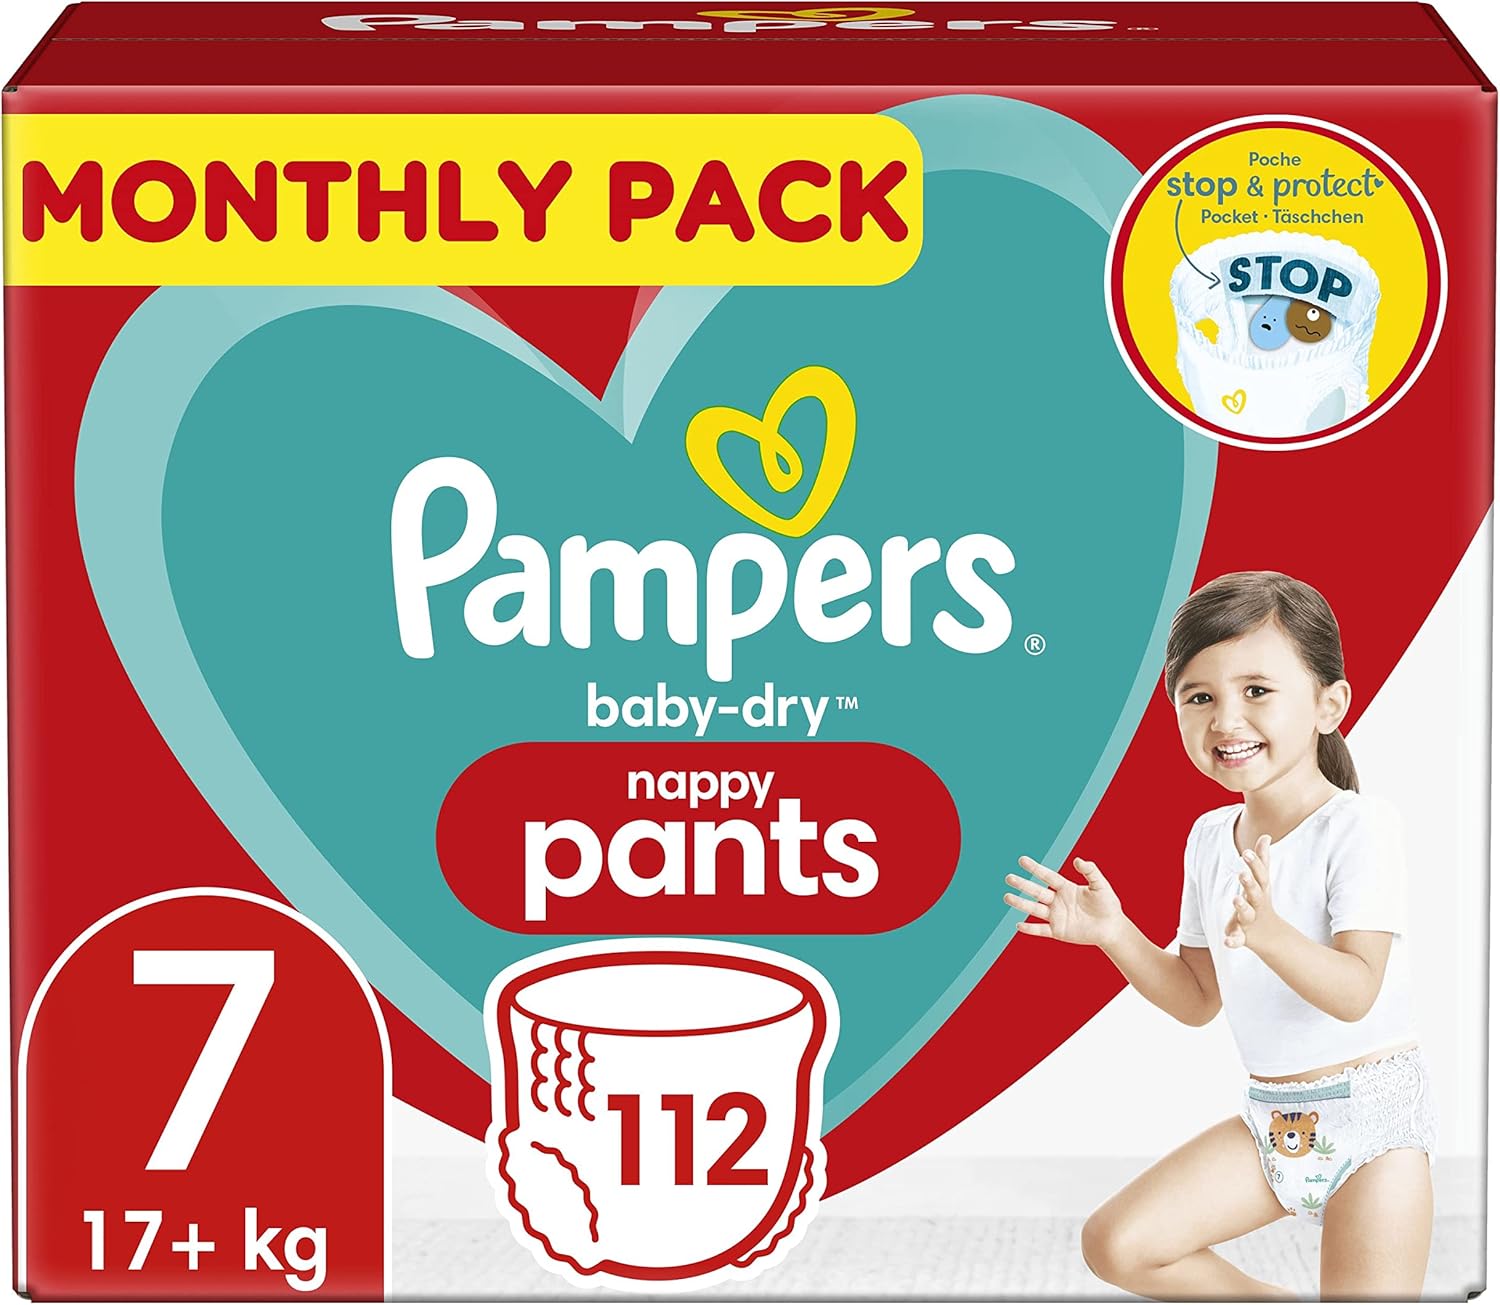 rozmiary pieluchy pampers active baby opinie